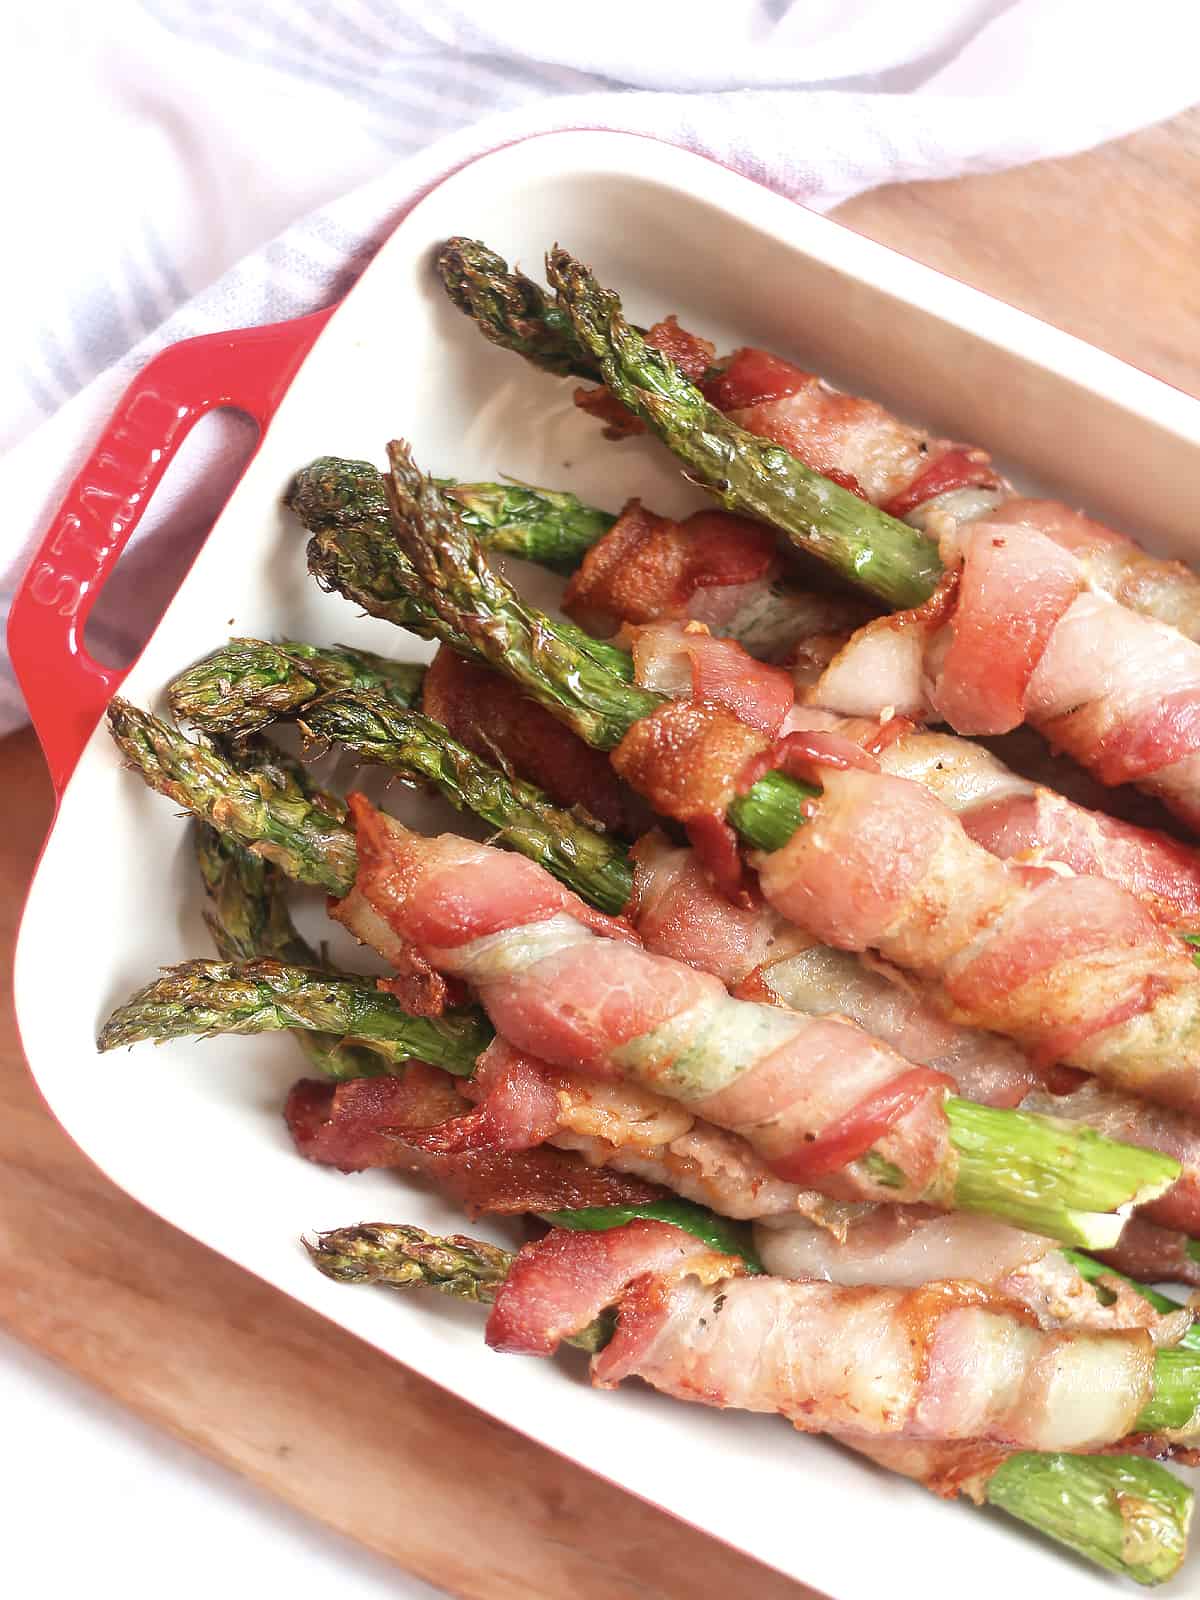 Asparagus spears wrapped in crispy bacon.